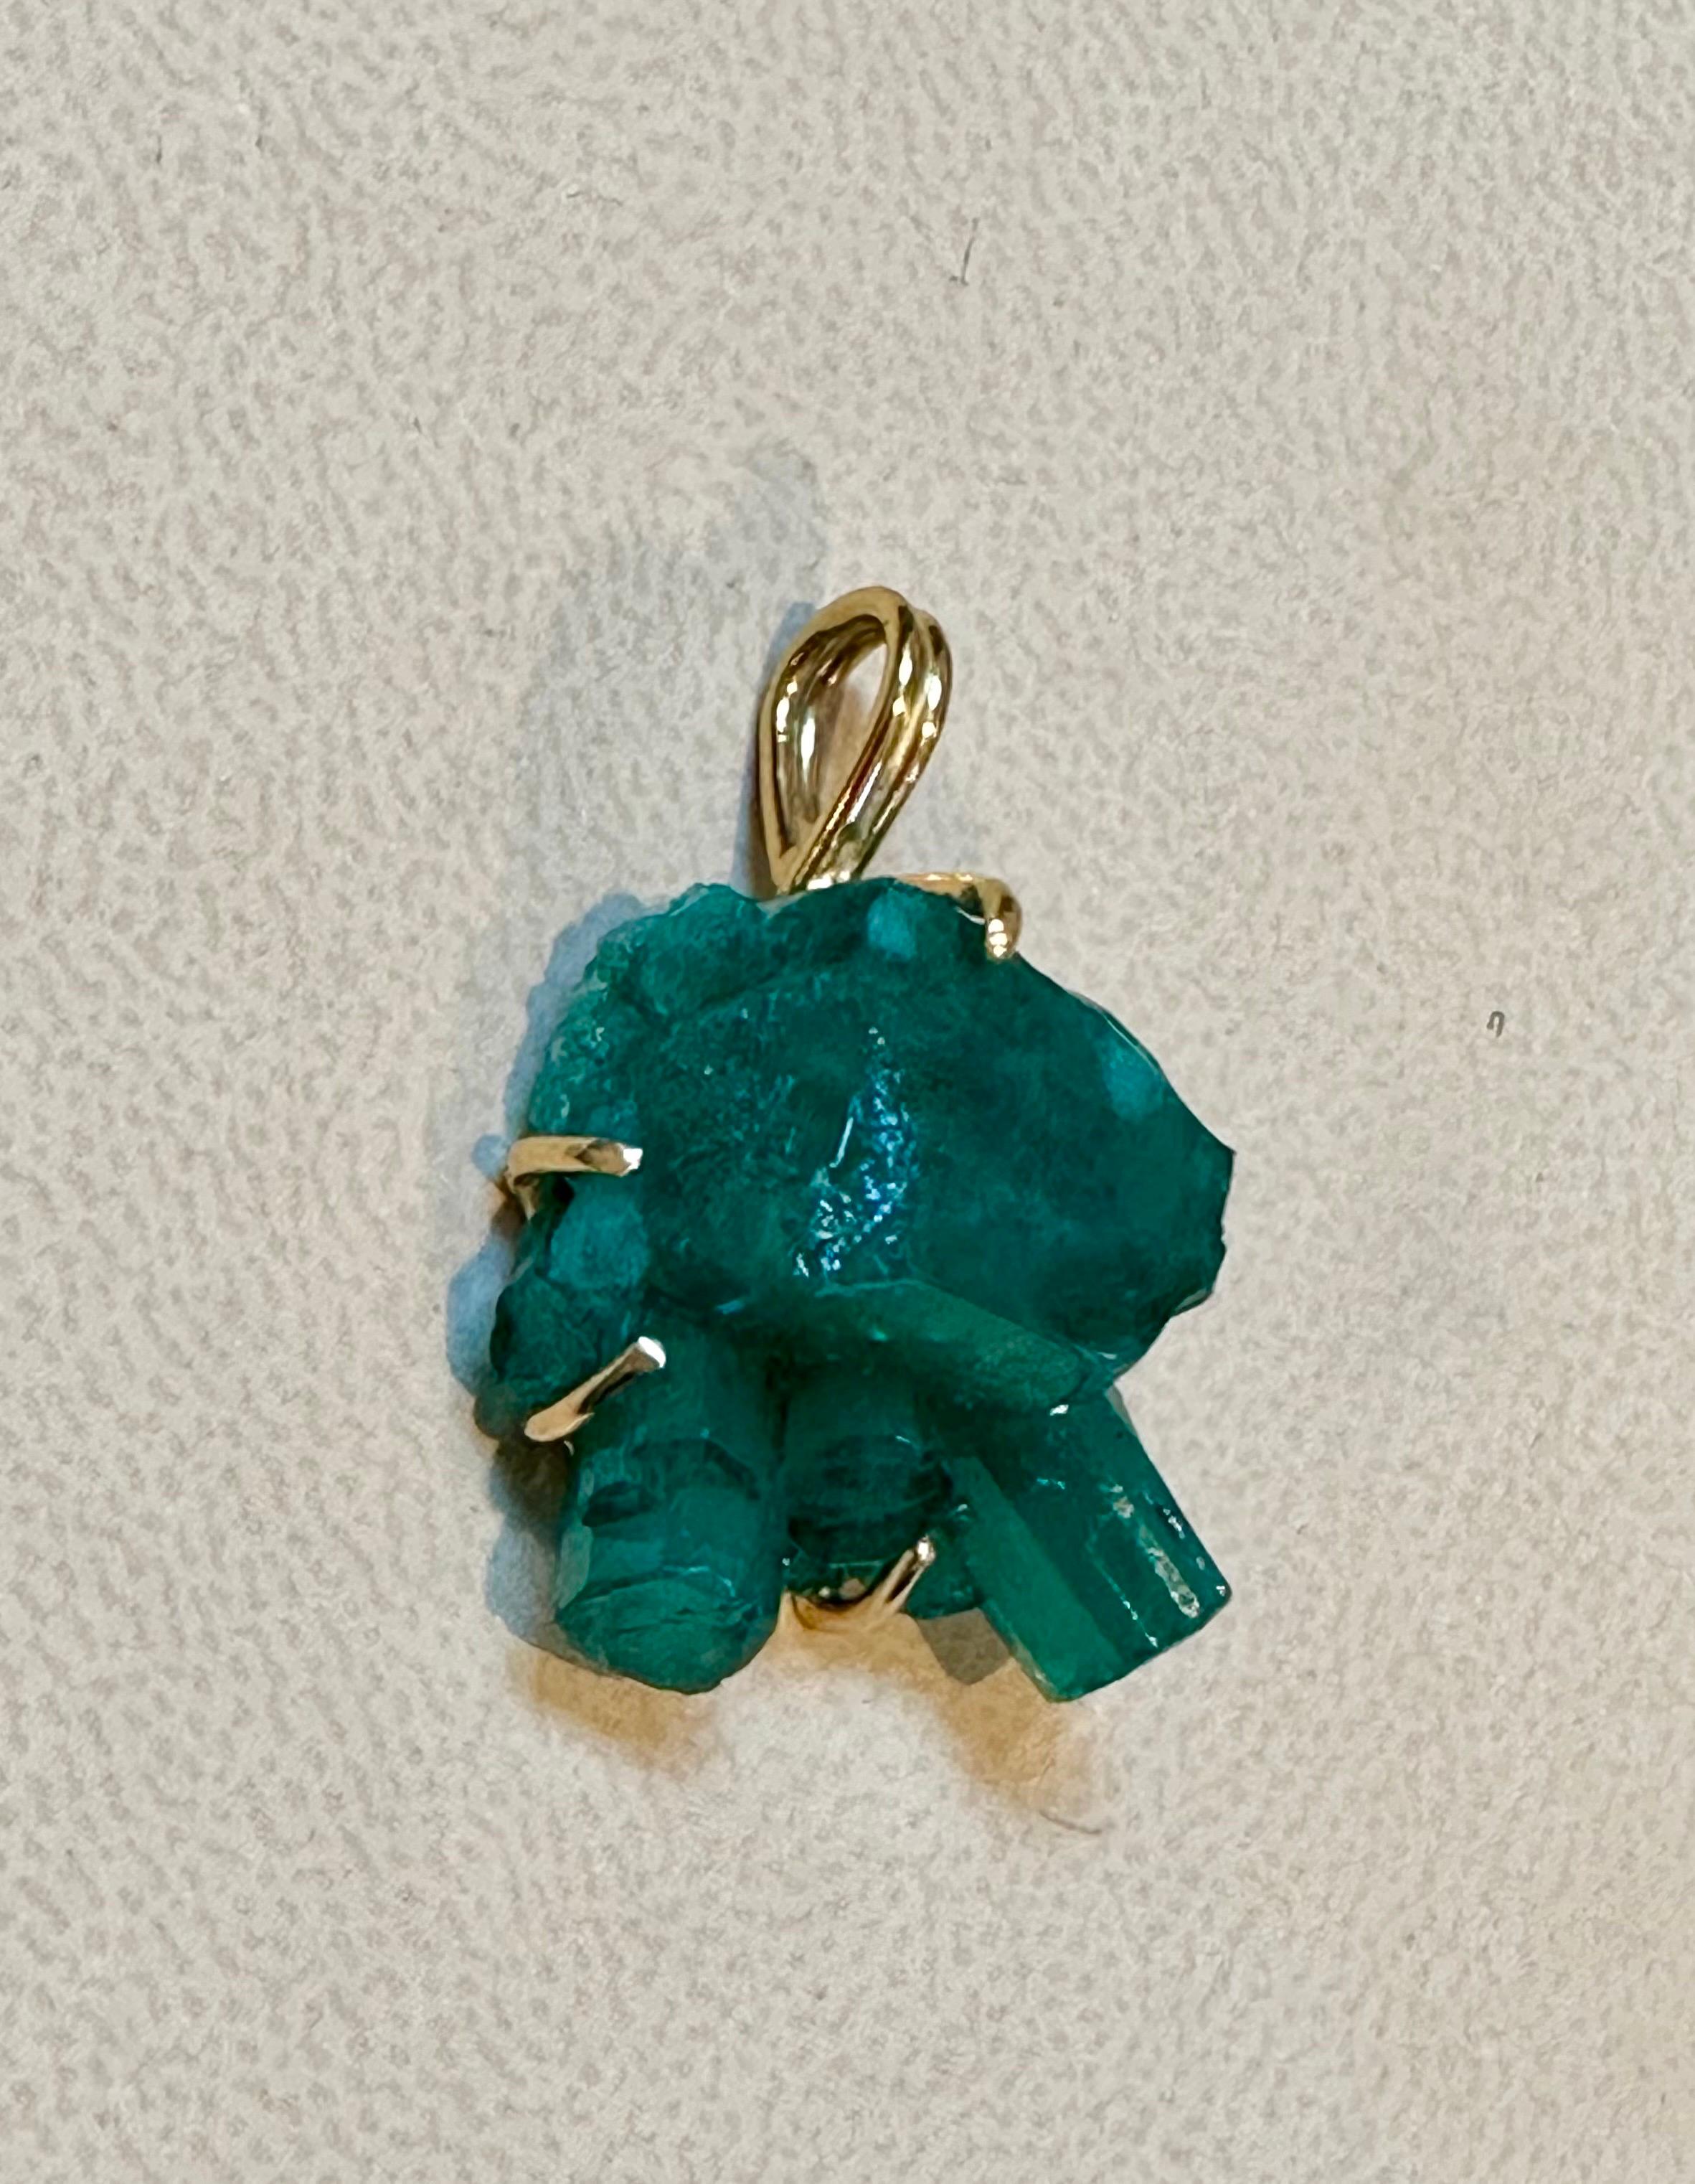 25 Carat Colombian Emerald Rough Pendent/Necklace 18 Karat Gold with 18 KG Chain For Sale 5